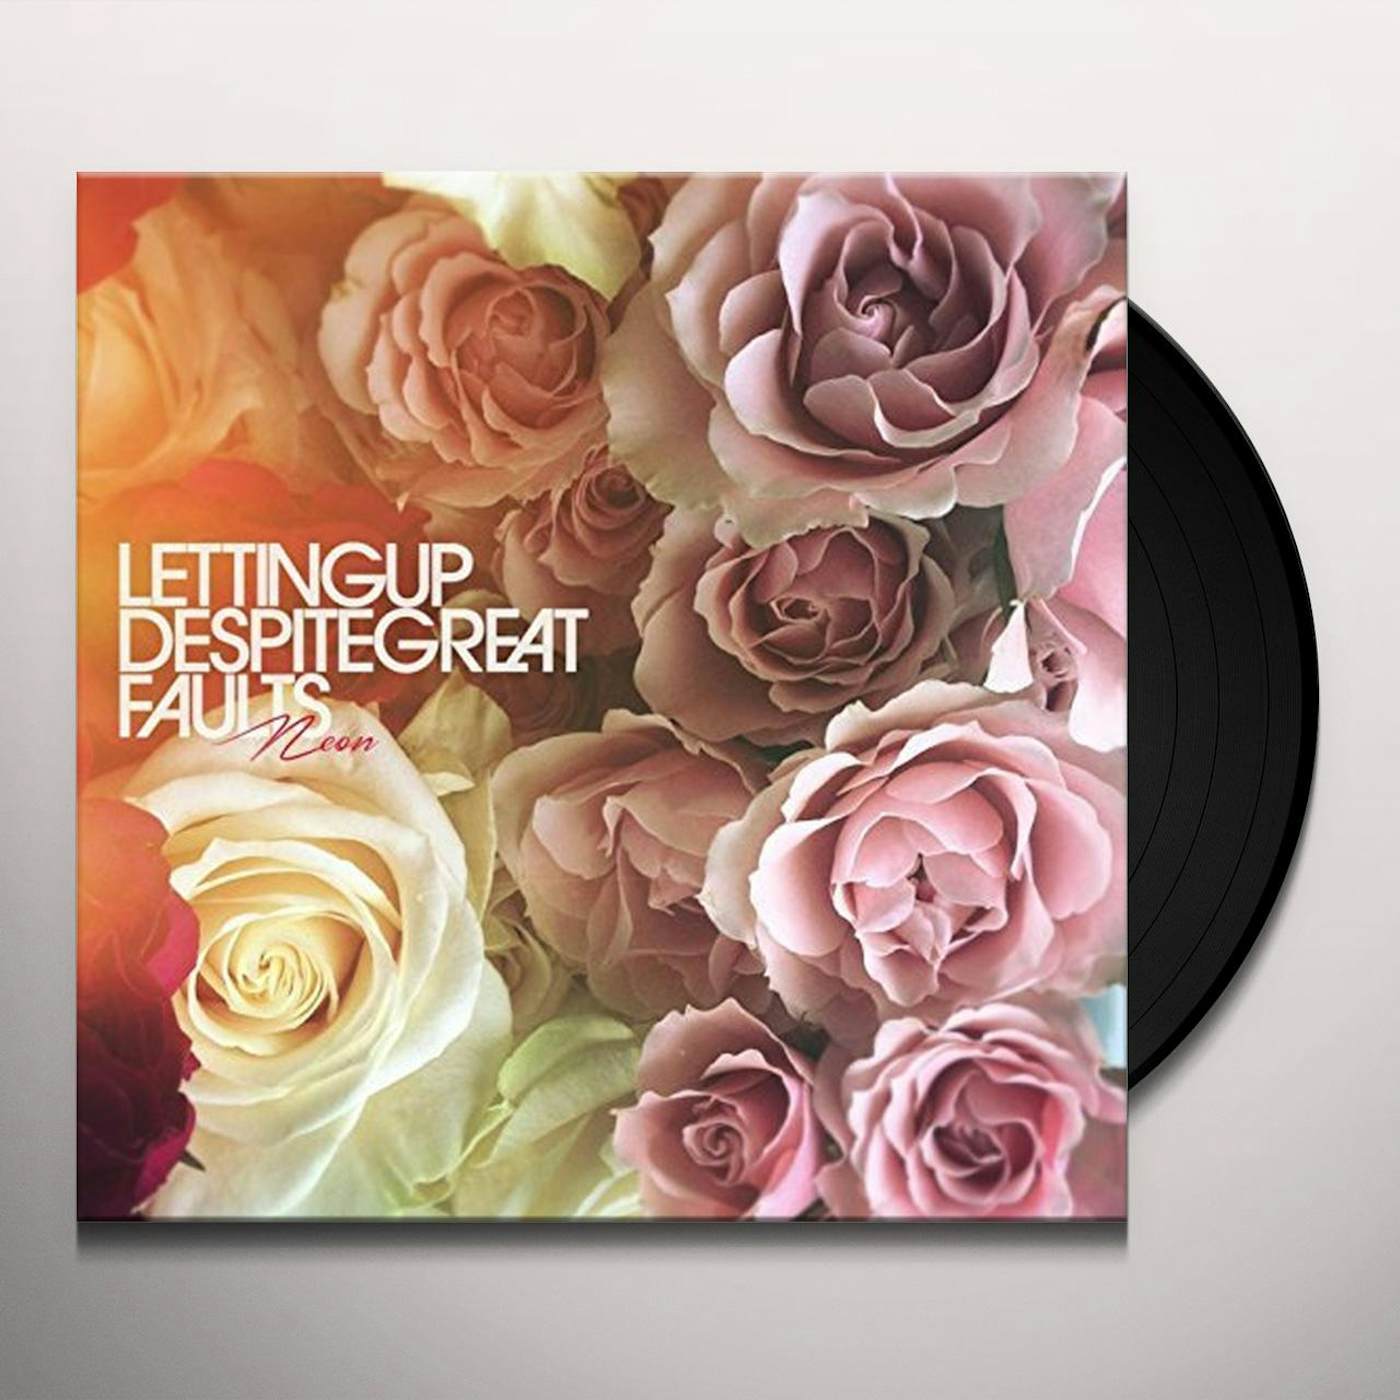 Letting Up Despite Great Faults Neon Vinyl Record